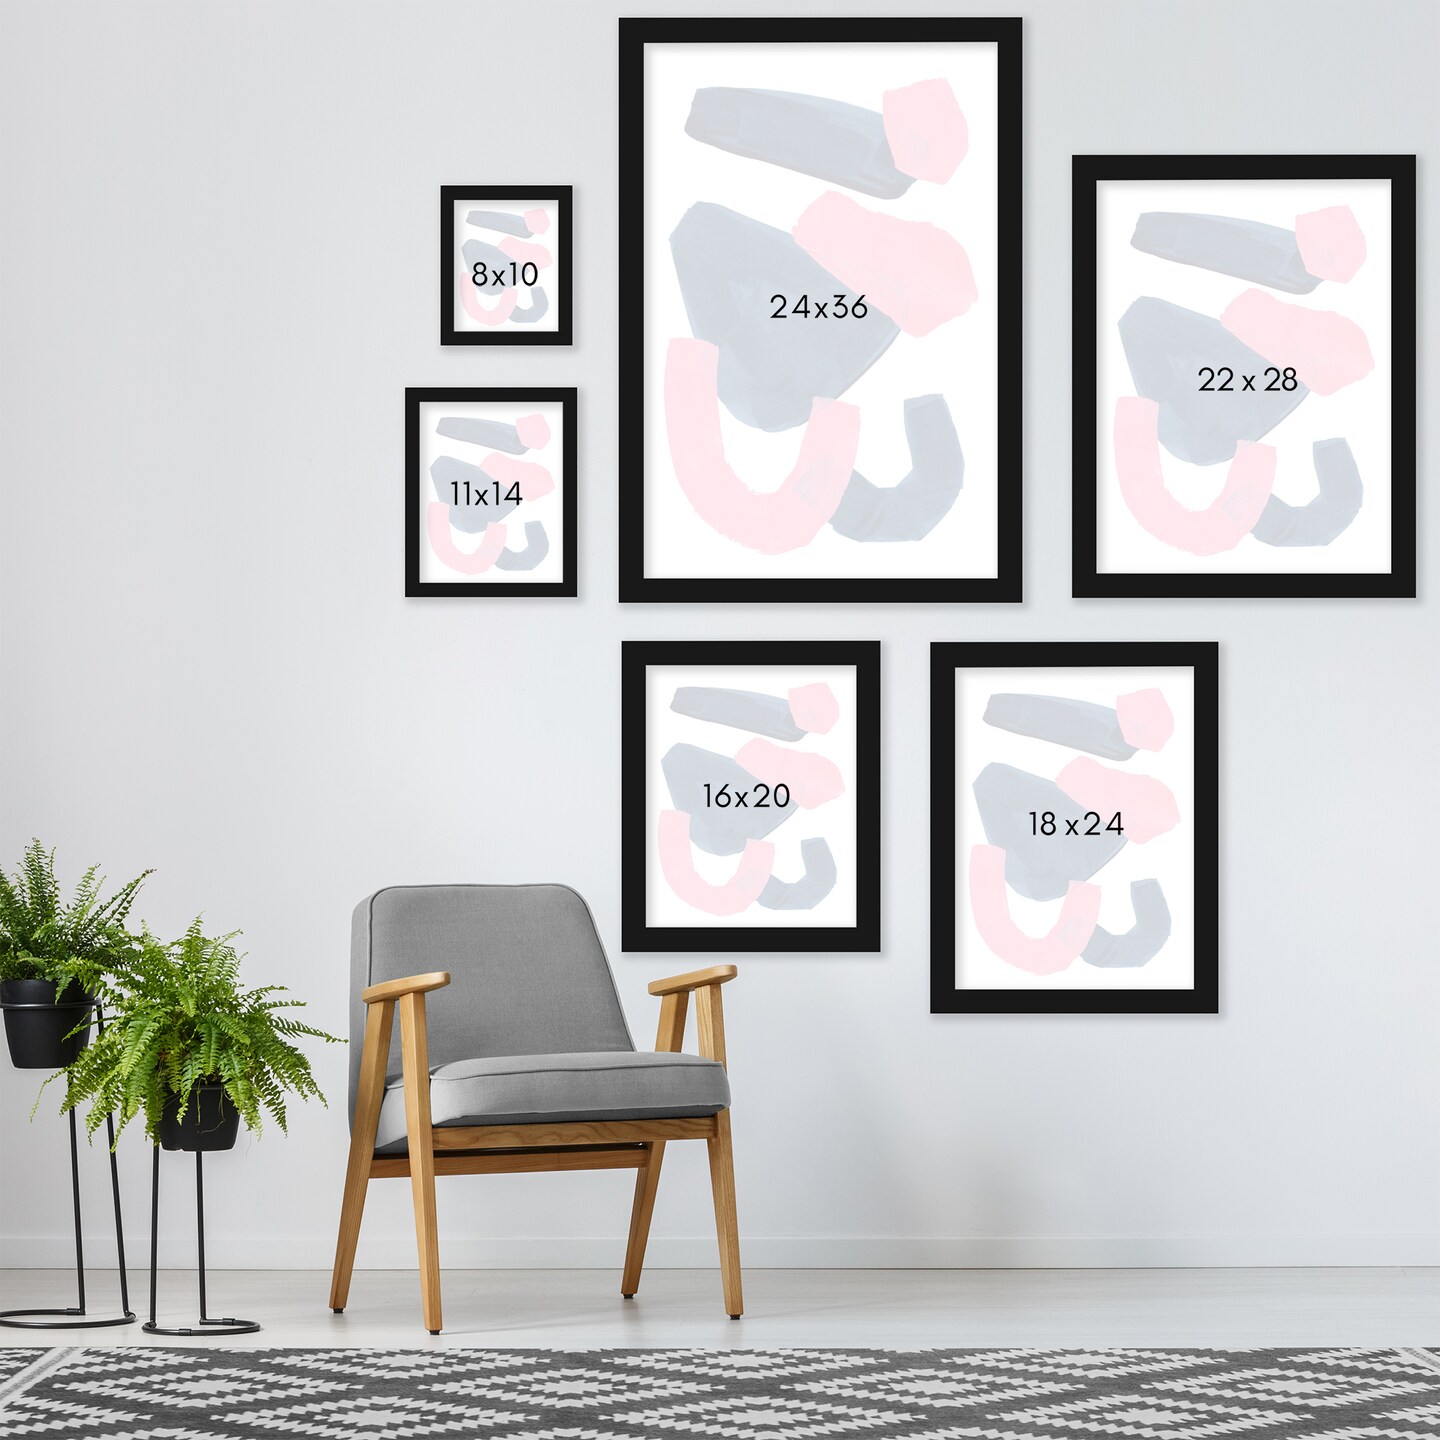 Navy Pink Abstract Shapes by Ejaaz Haniff Frame  - Americanflat